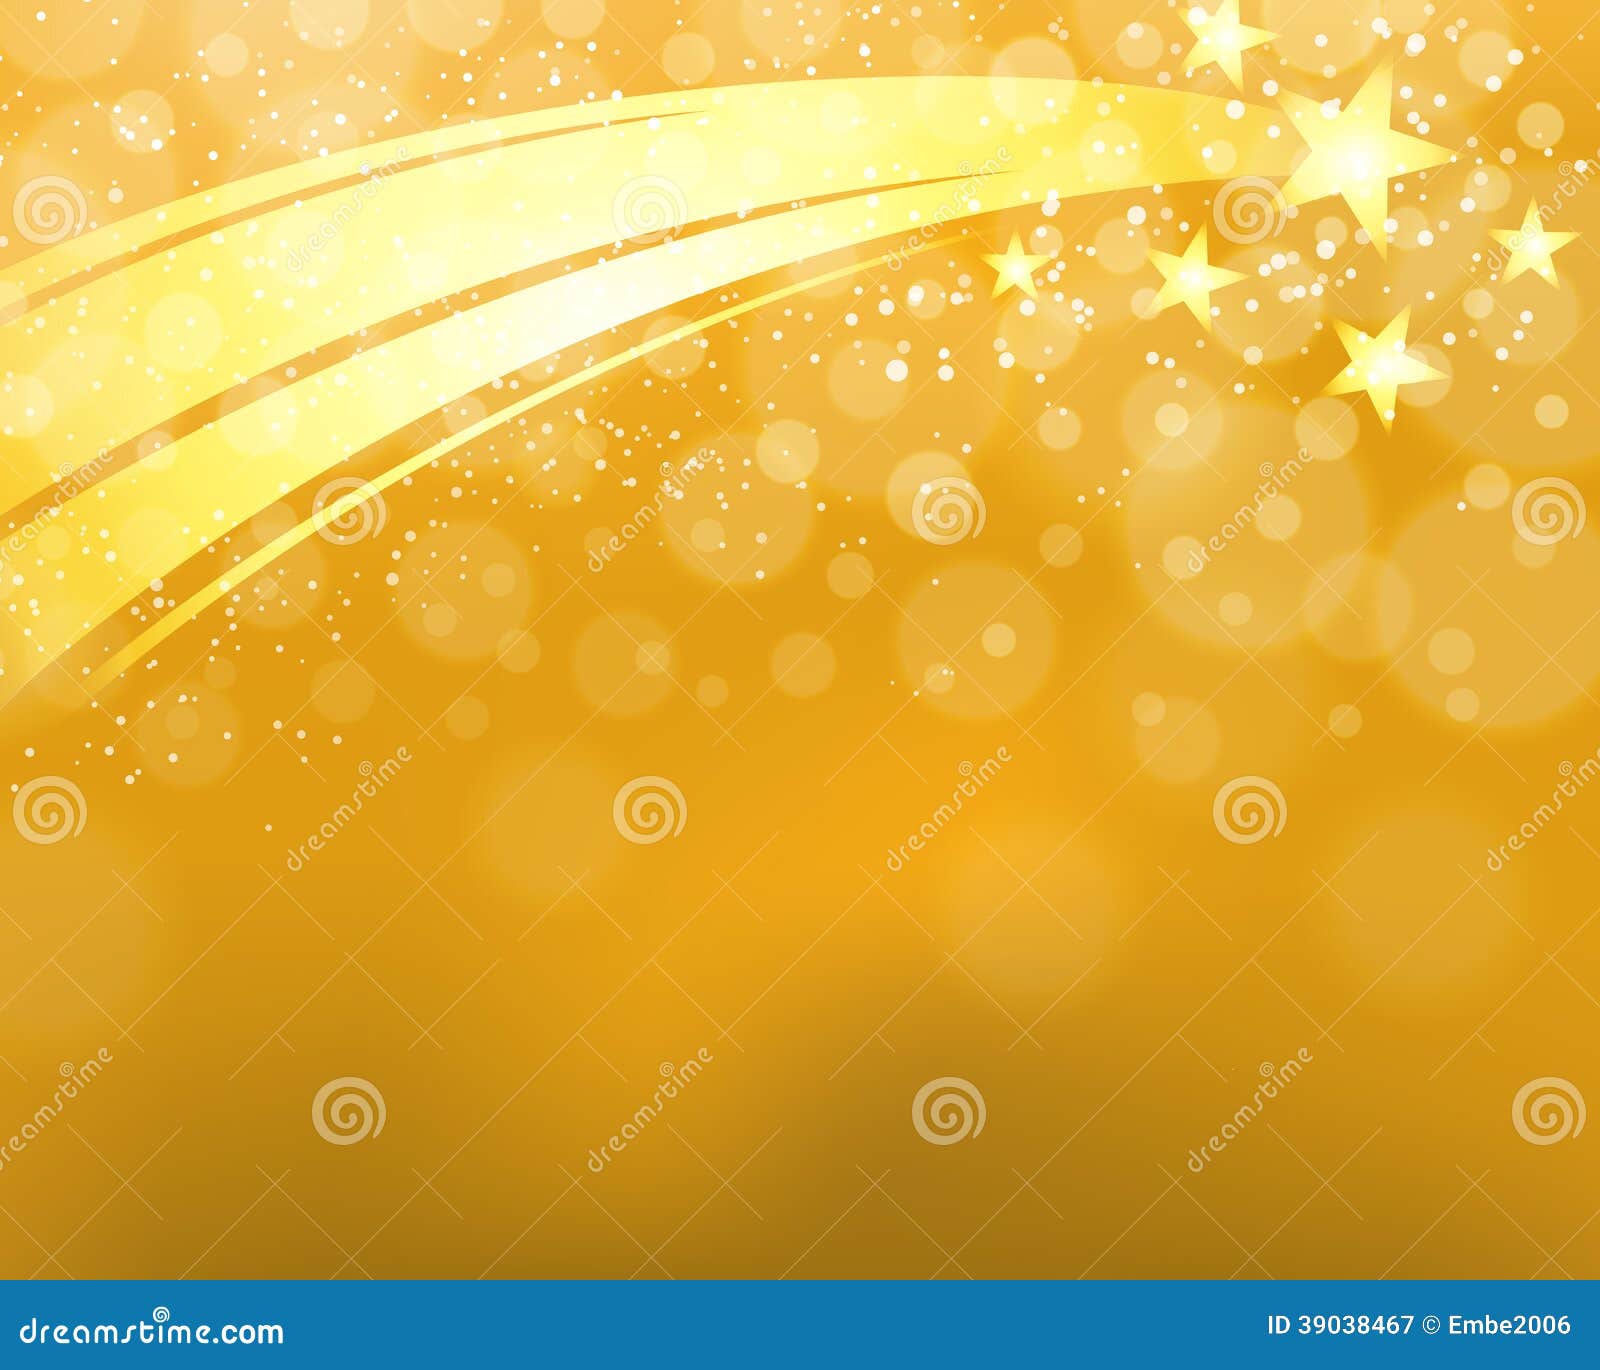 gold shooting star background